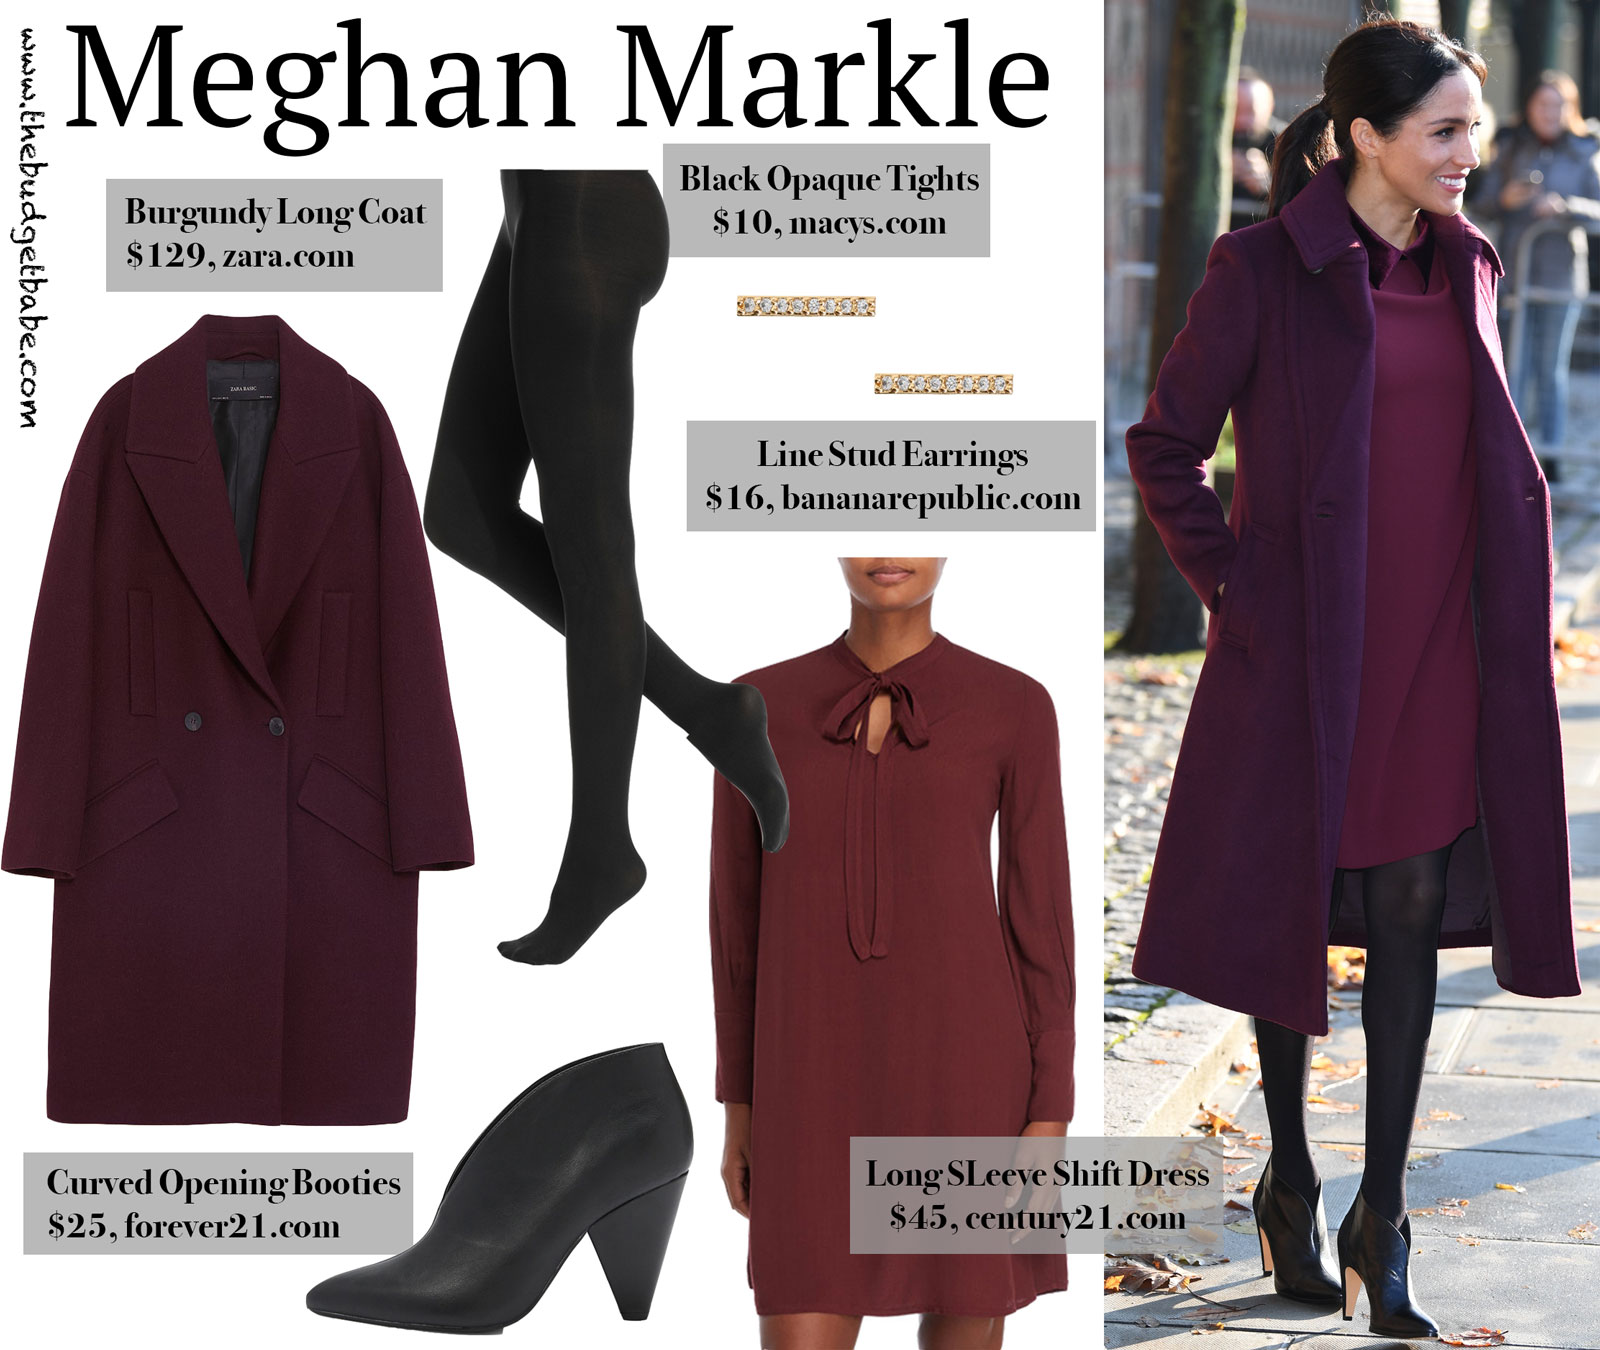 Meghan Markle Burgundy Coat and Dress Look for Less